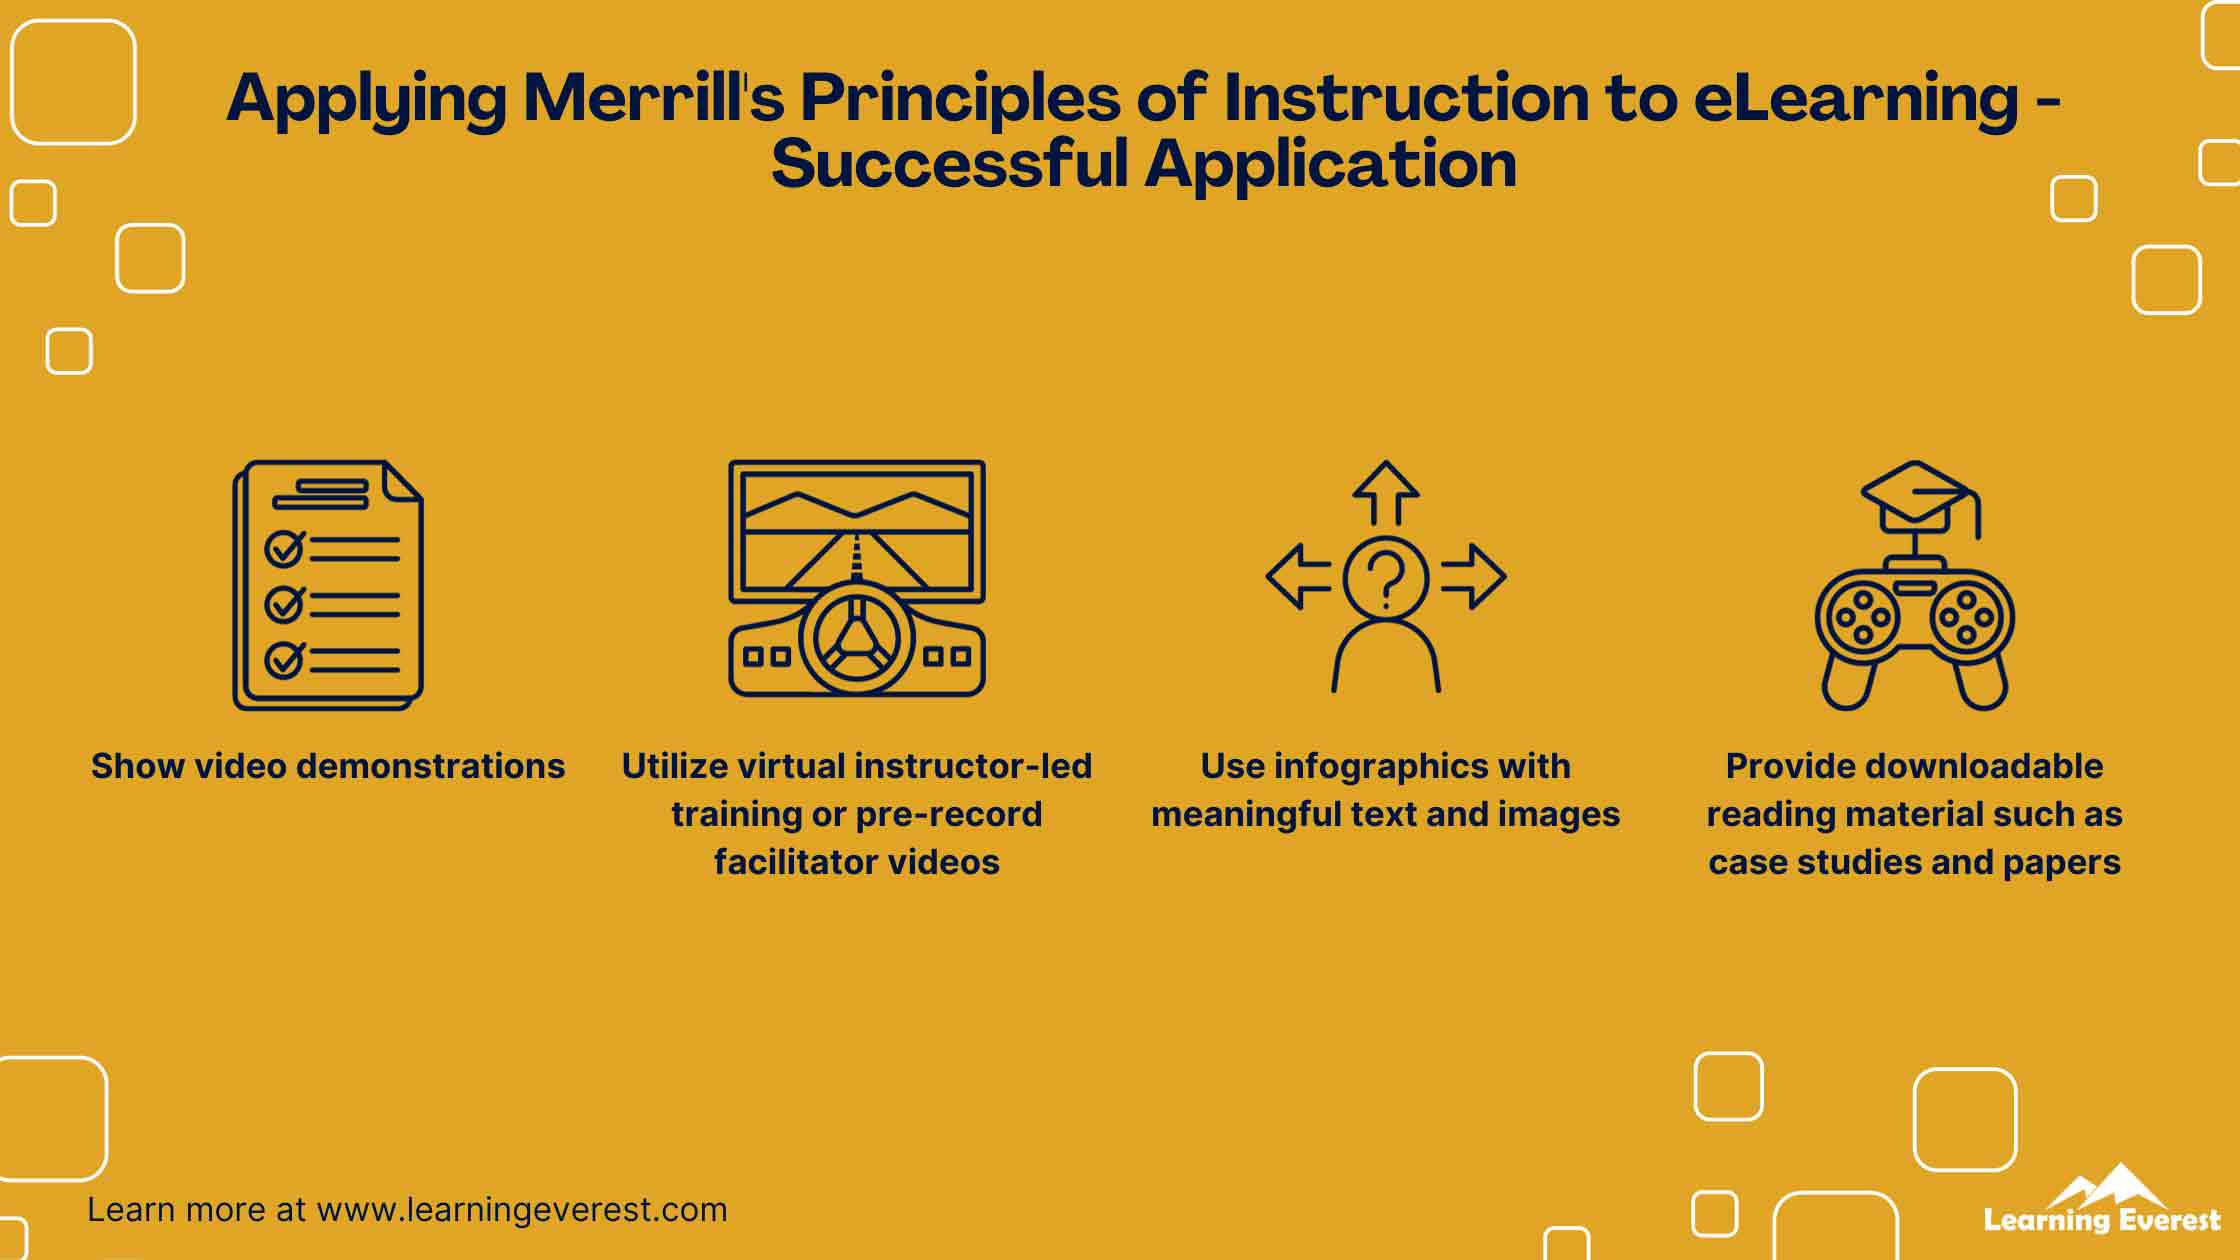 Applying Merrill's Principles of Instruction to eLearning - Successful Application